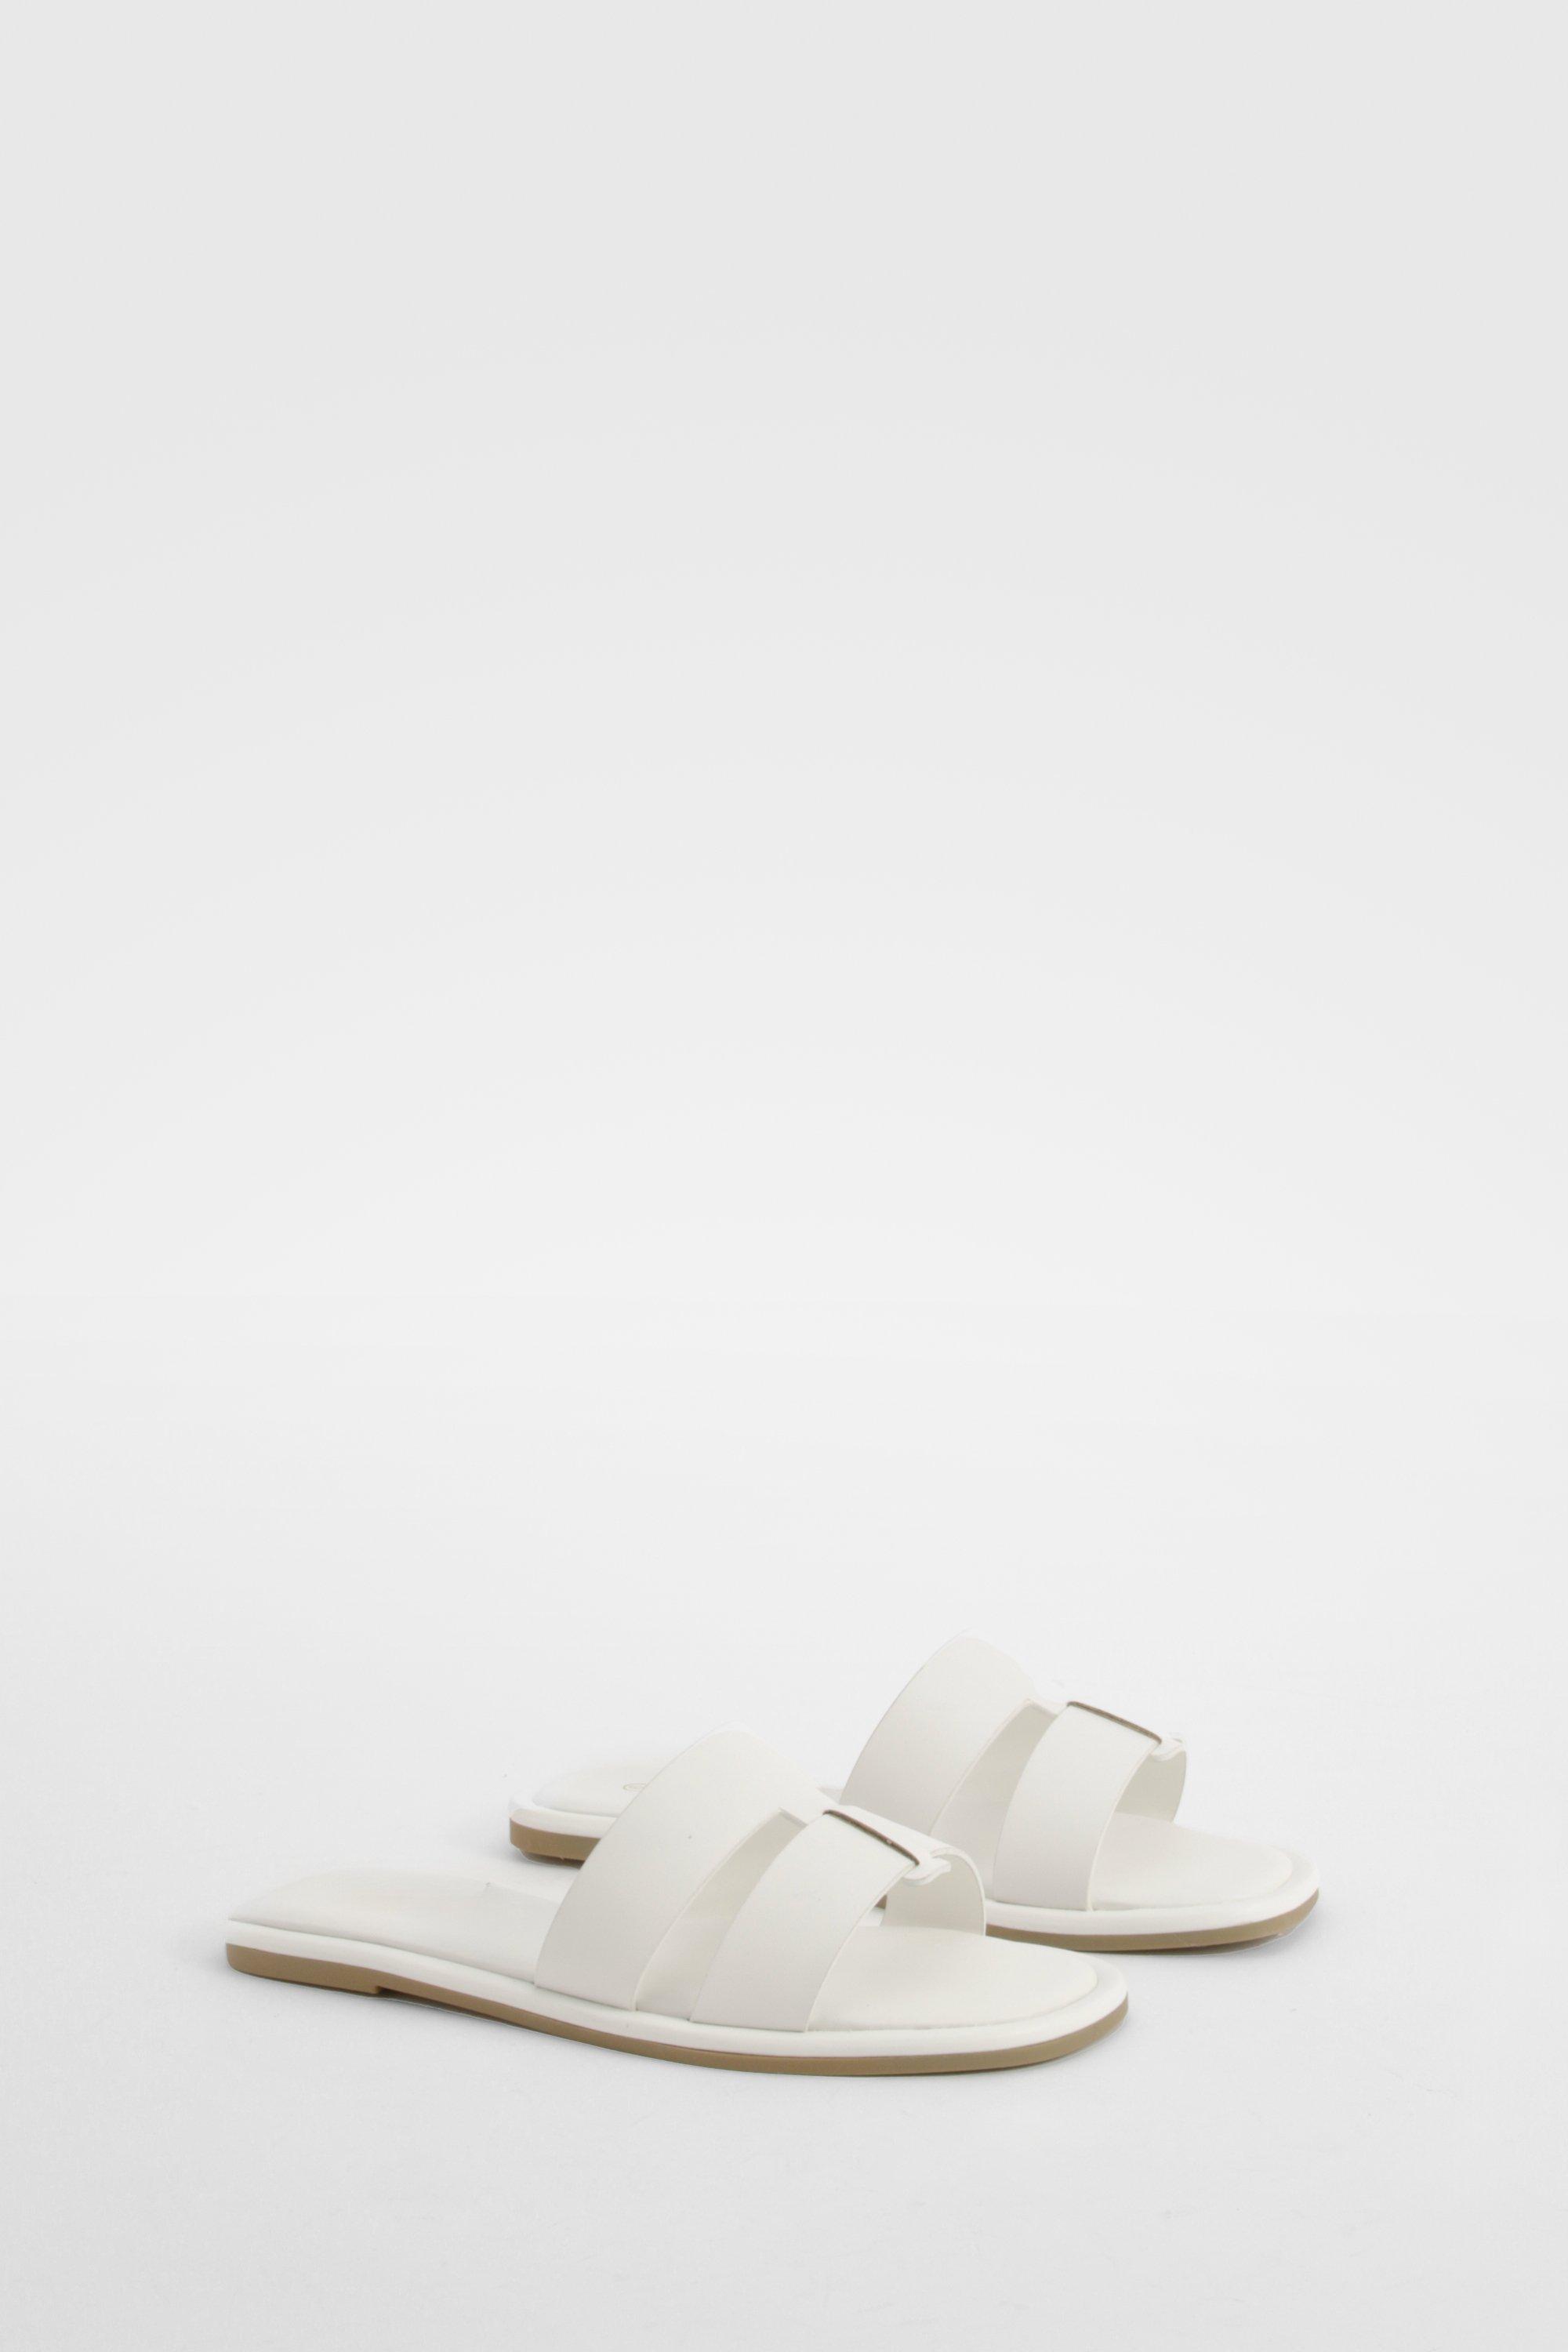 Image of Woven Mule Sandals, Bianco